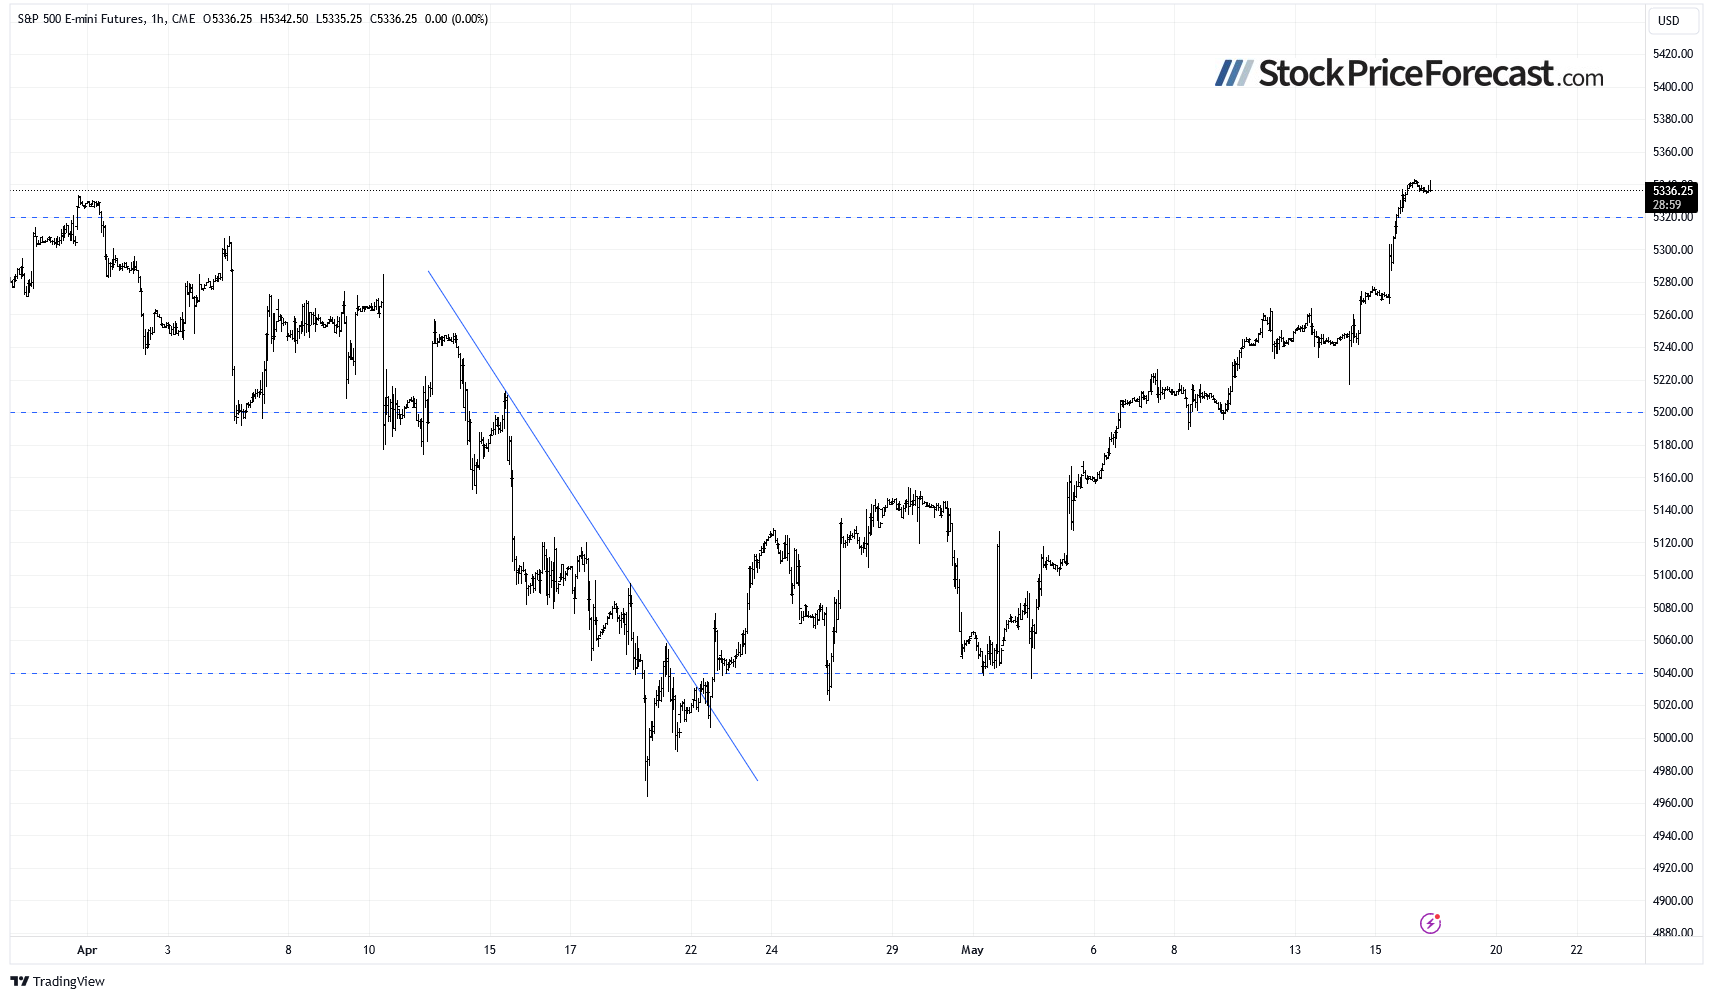 S&P 500 Futures-Hourly Chart